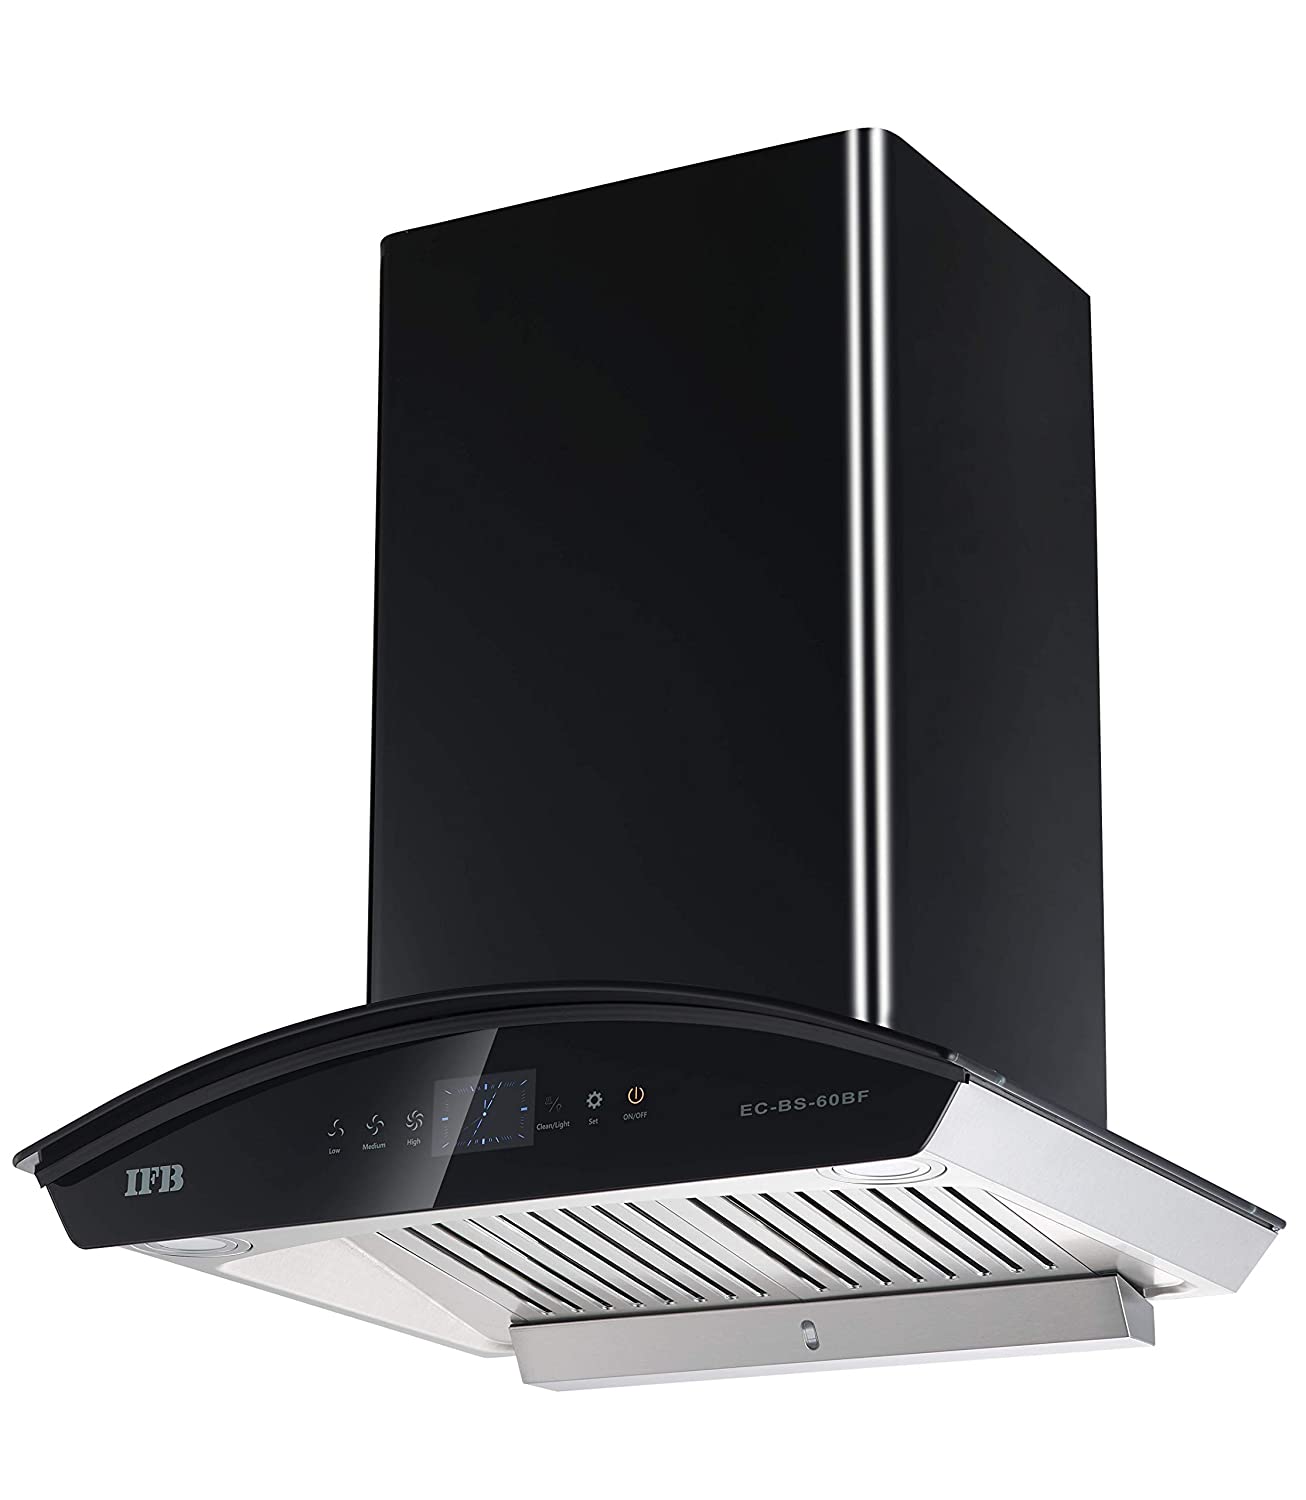 IFB EC -BS -HS-60BF 60 Cm 1200 m³/hr Auto-Clean Curved Glass Kitchen Chimney ( Feather Touch, Baffle Filter, Black Steel) - Mahajan Electronics Online